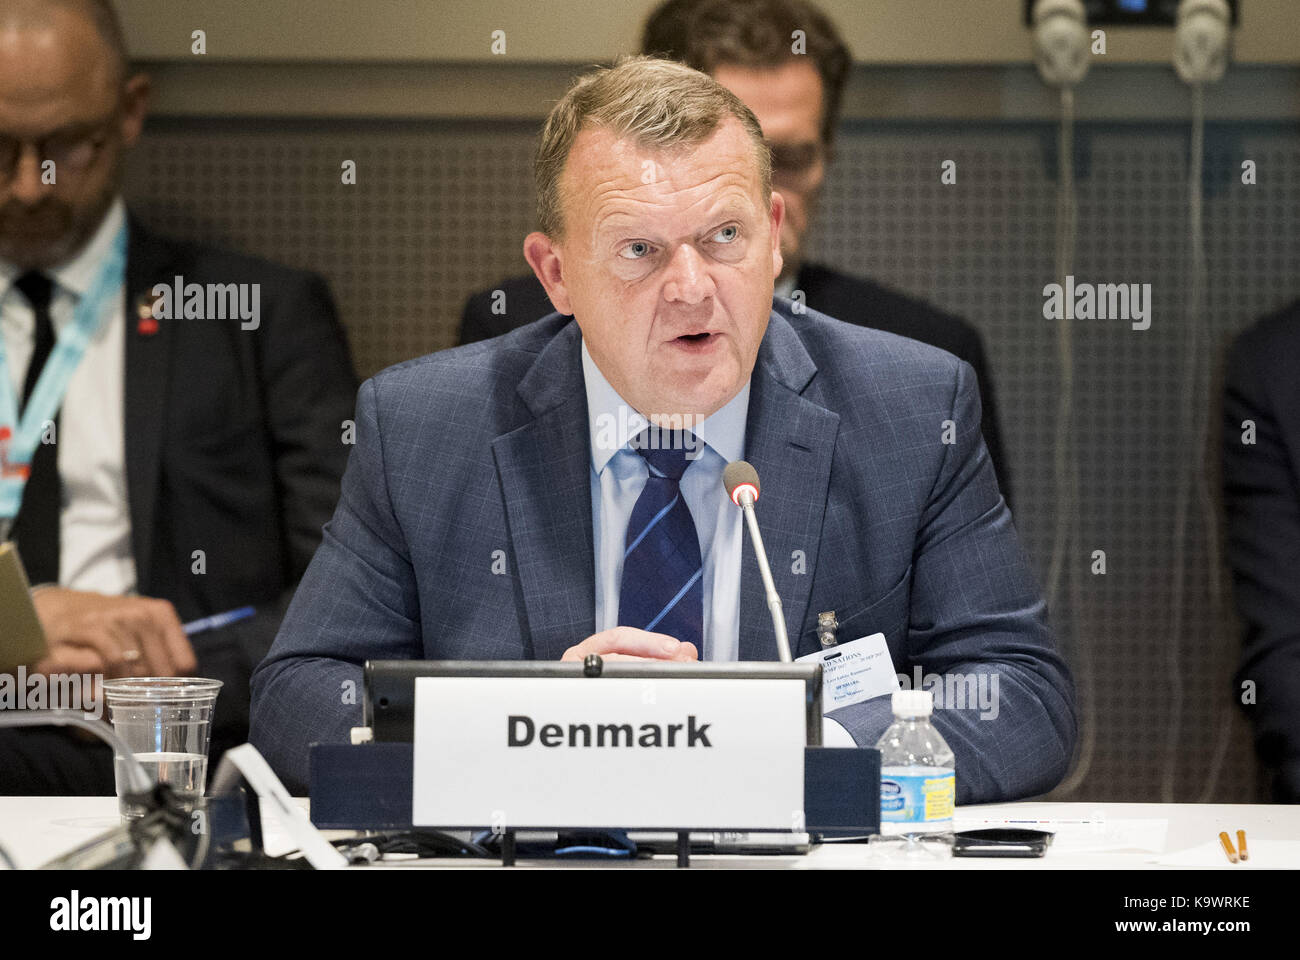 New York, NY, USA. 18th Sep, 2017. LARS LOKKE RASMUSSEN, Prime Minister of Denmark, at the United Nations in New York City, NY on September 18, 2017. Credit: Michael Brochstein/ZUMA Wire/Alamy Live News Stock Photo